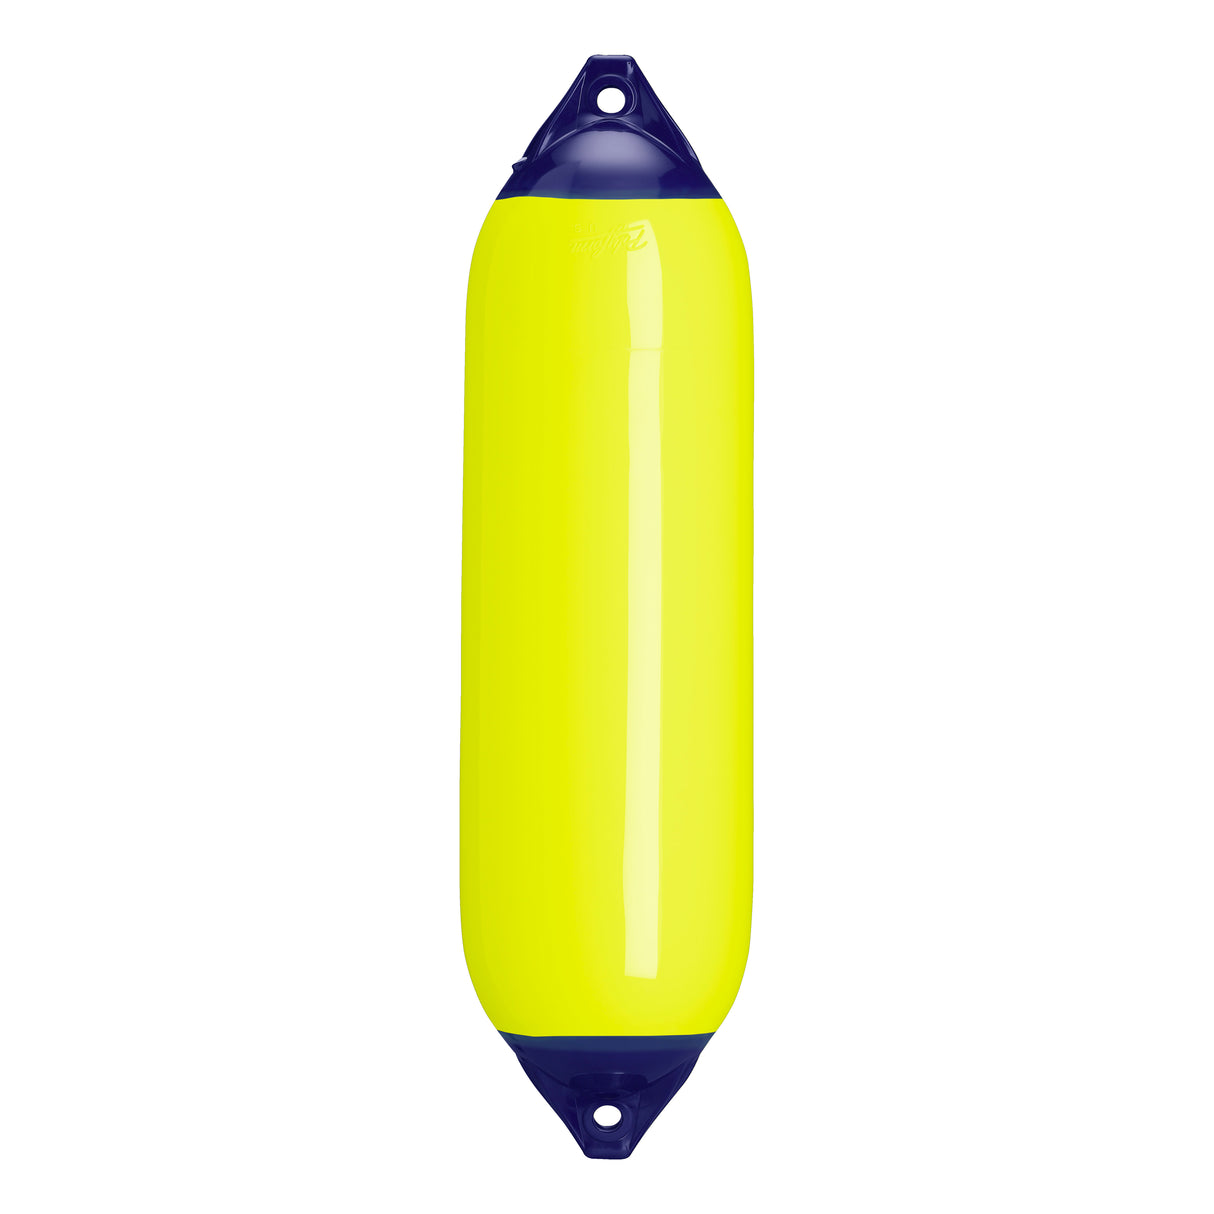 Saturn Yellow boat fender with Navy-Top, Polyform F-6 